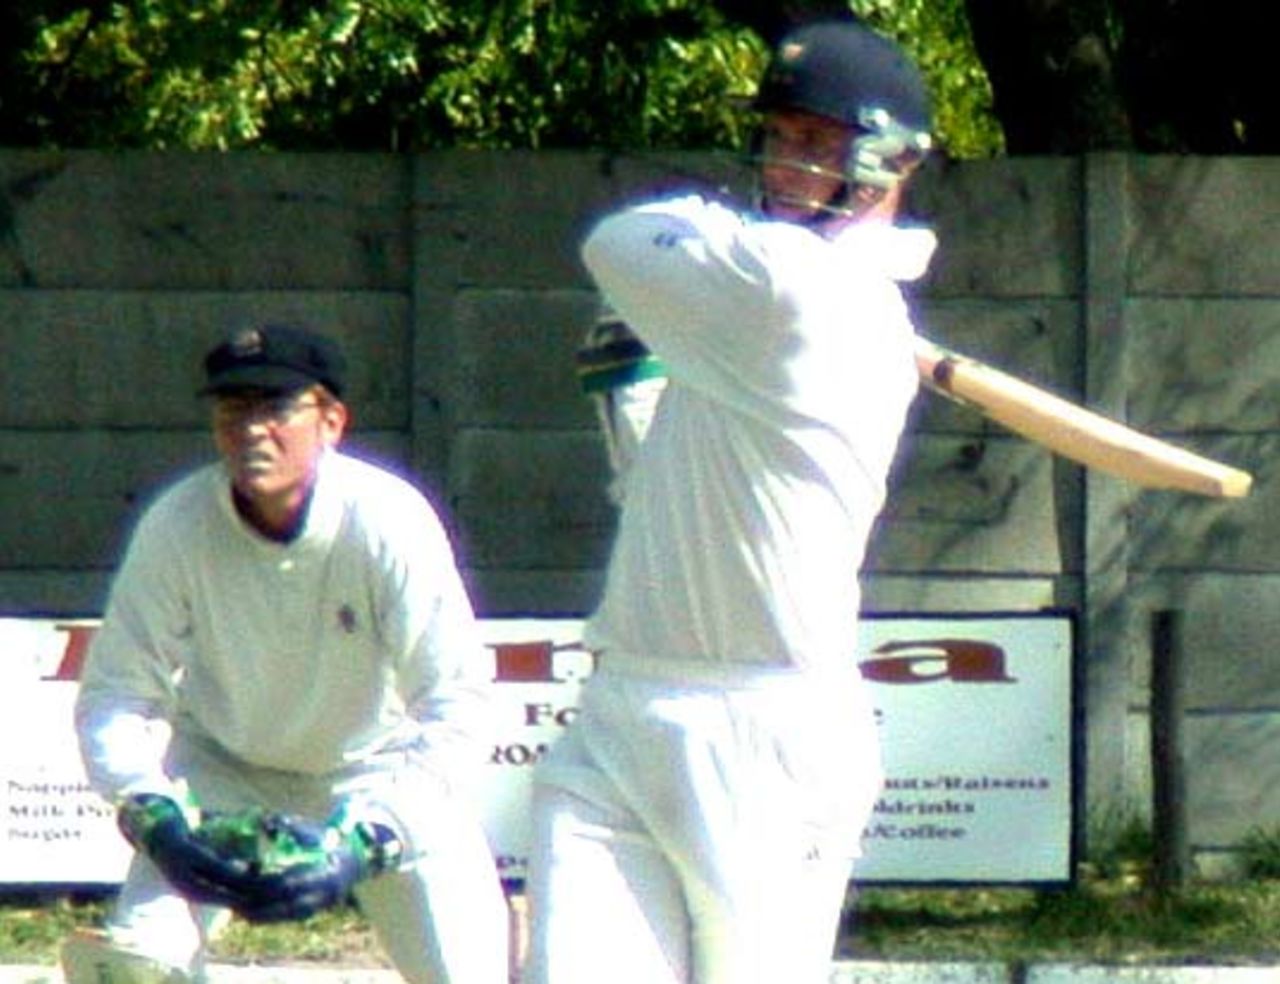 UCT's Graeme Smith pulling against Cape Town. The wicketkeeper is Scott Sedell